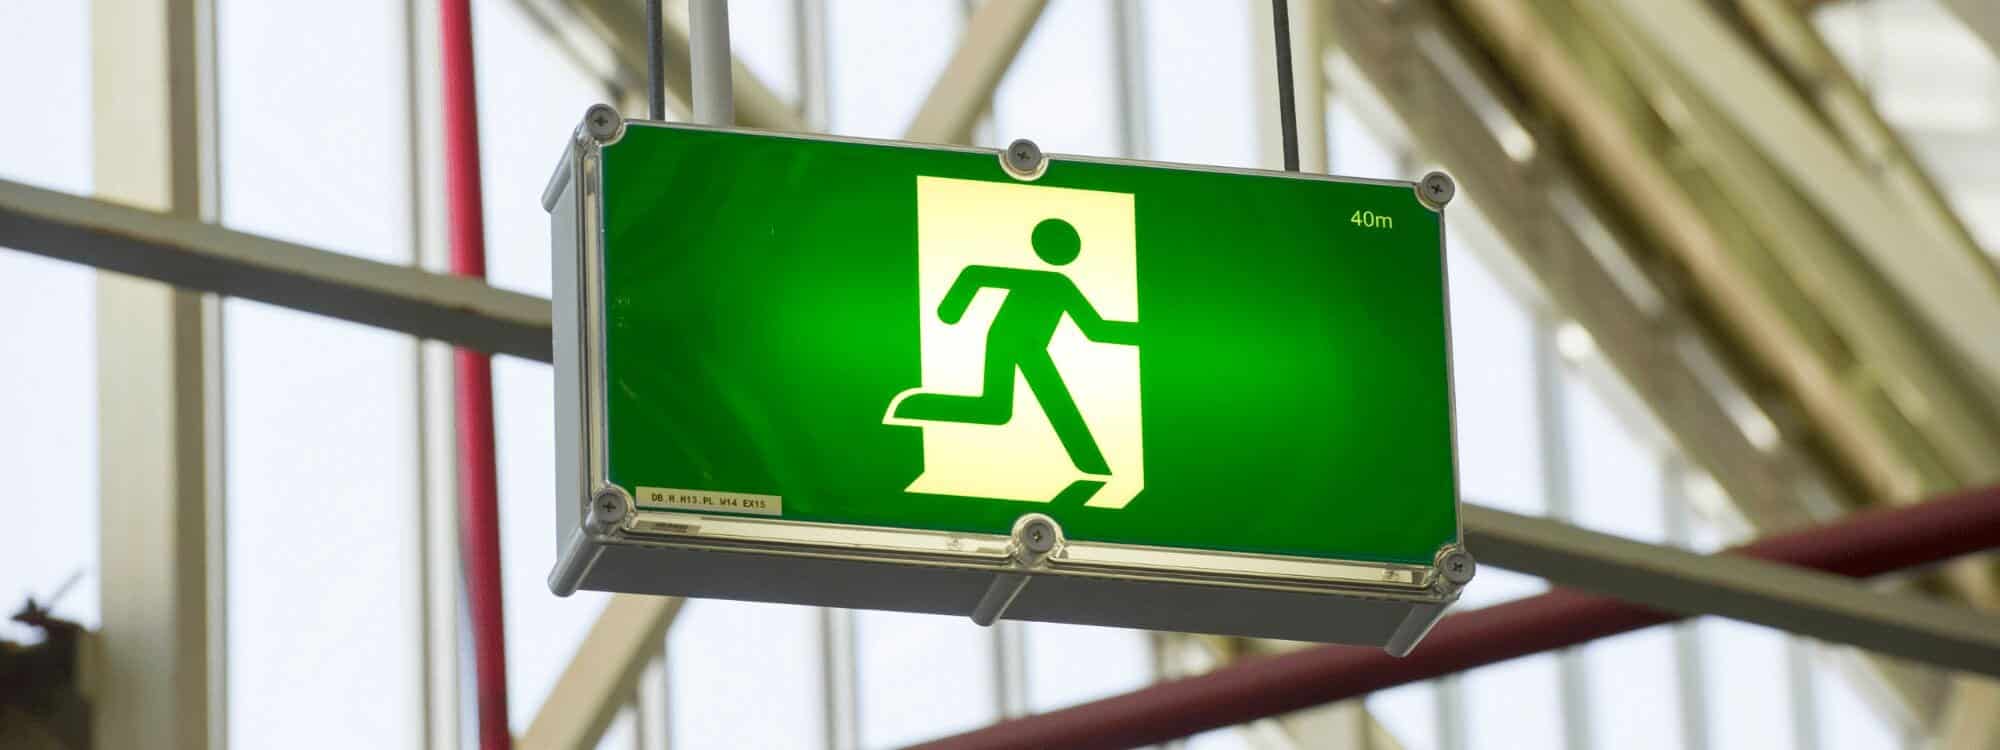 A working emergency exit sign highlights the importance of Increasing emergency capabilities and preparedness within organisations